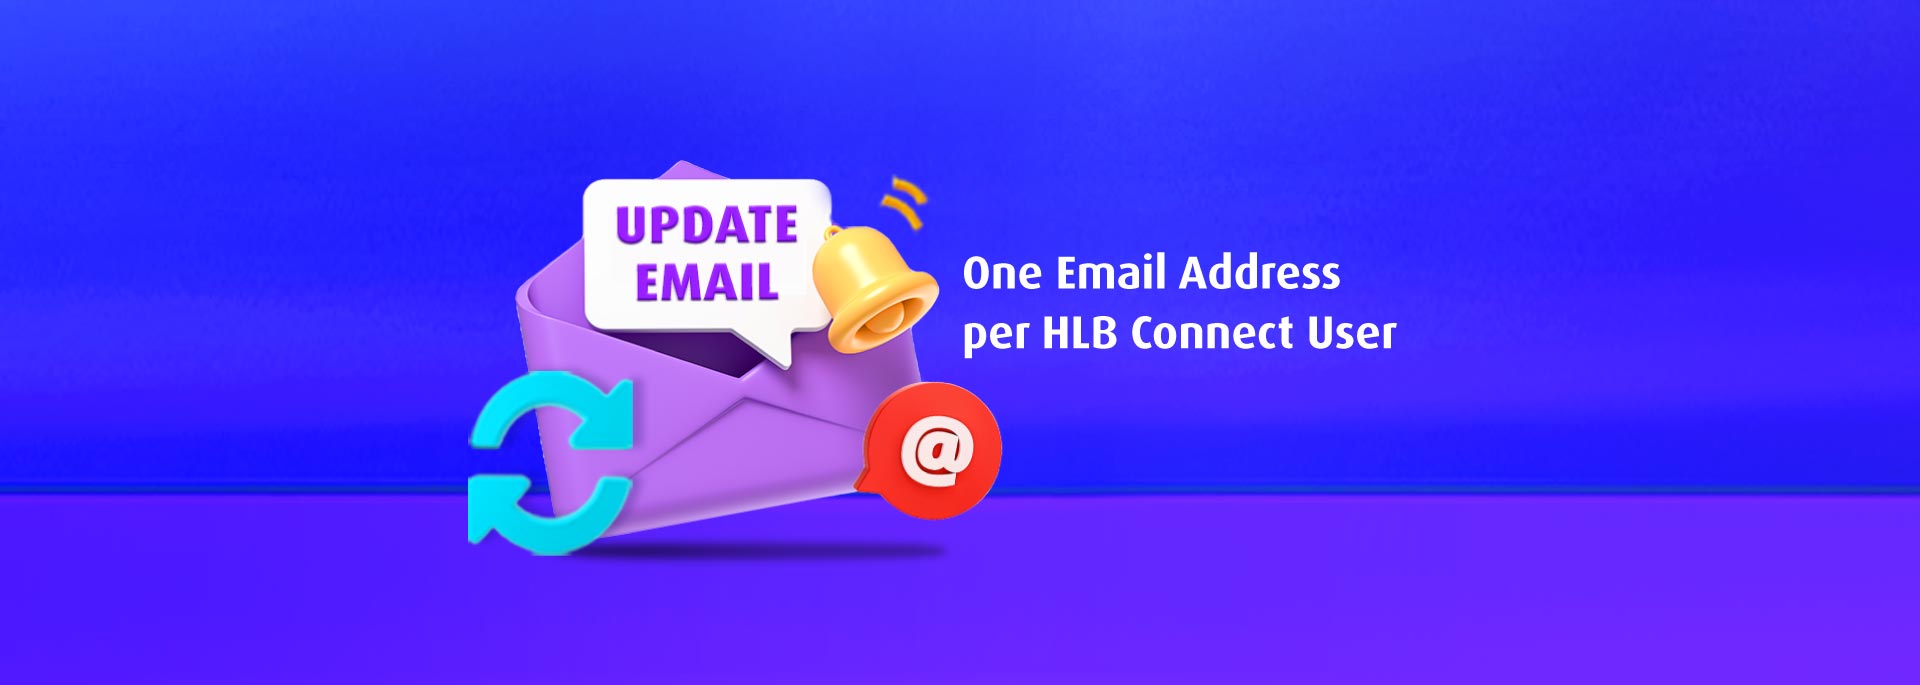 One Email Address per HLB Connect User